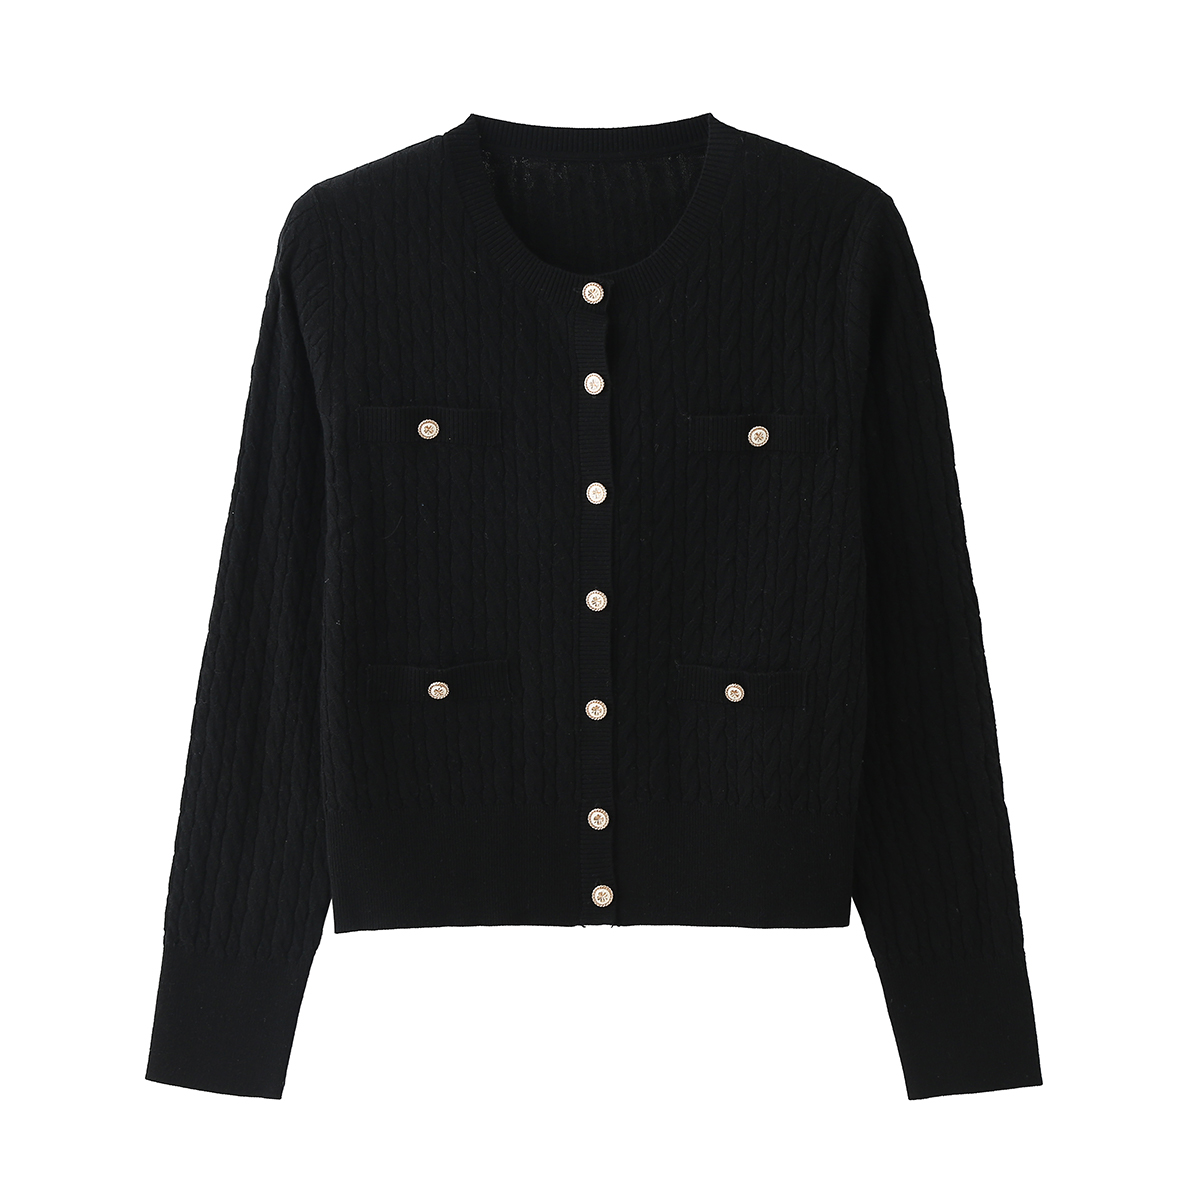 Round Neck Chanel-style Wool Sweater5